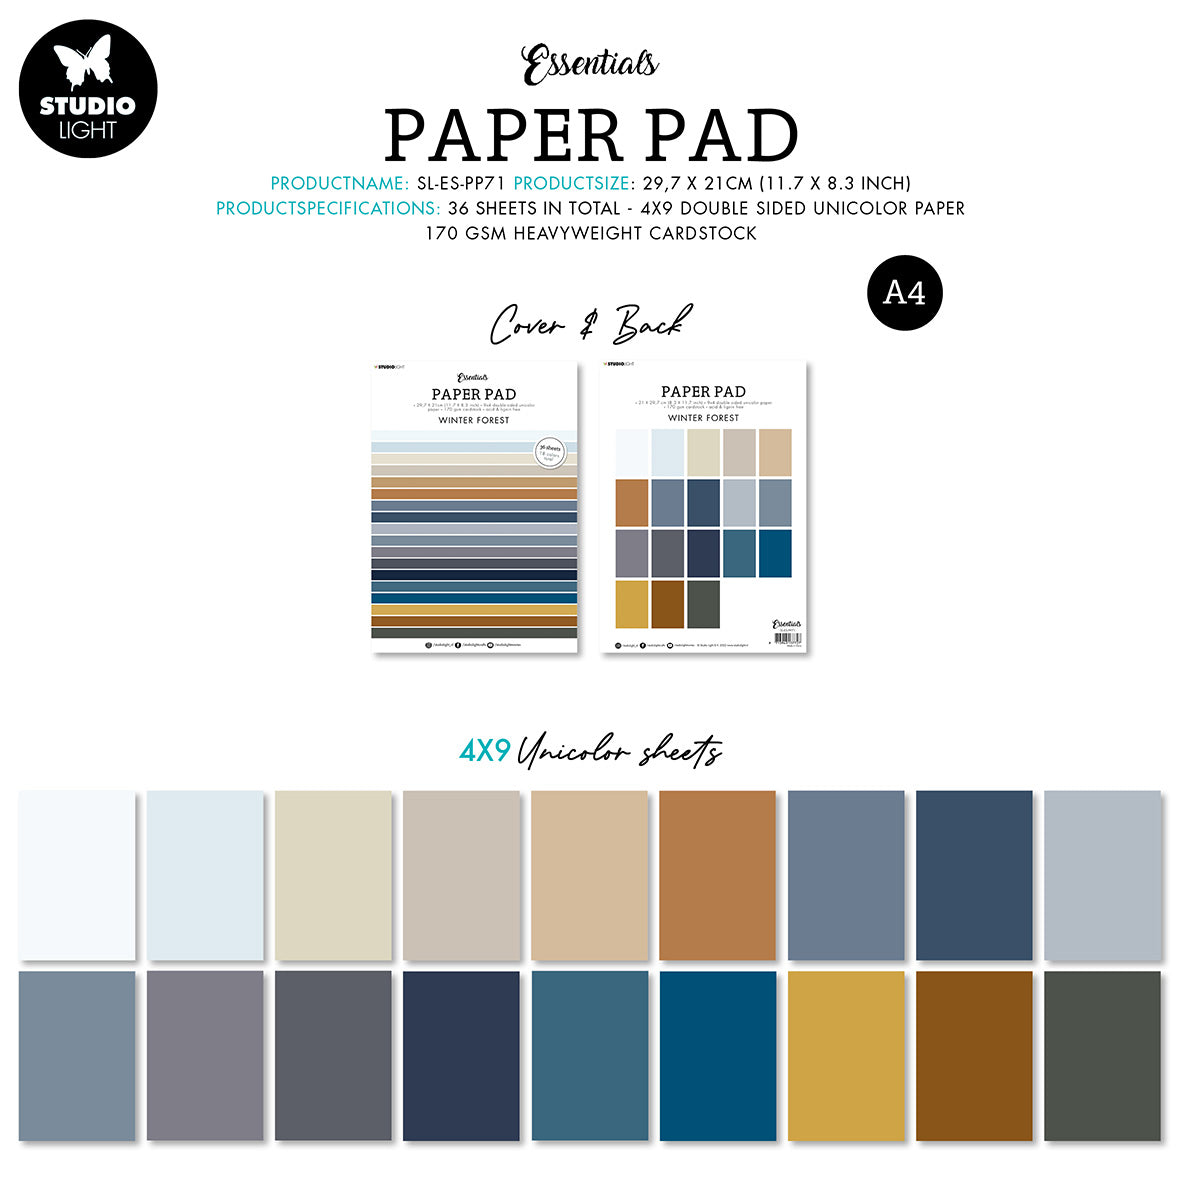 SL Paper Pad Double Sided Unicolor Winter Forest Essentials 210x297x9mm 36 SH nr.71